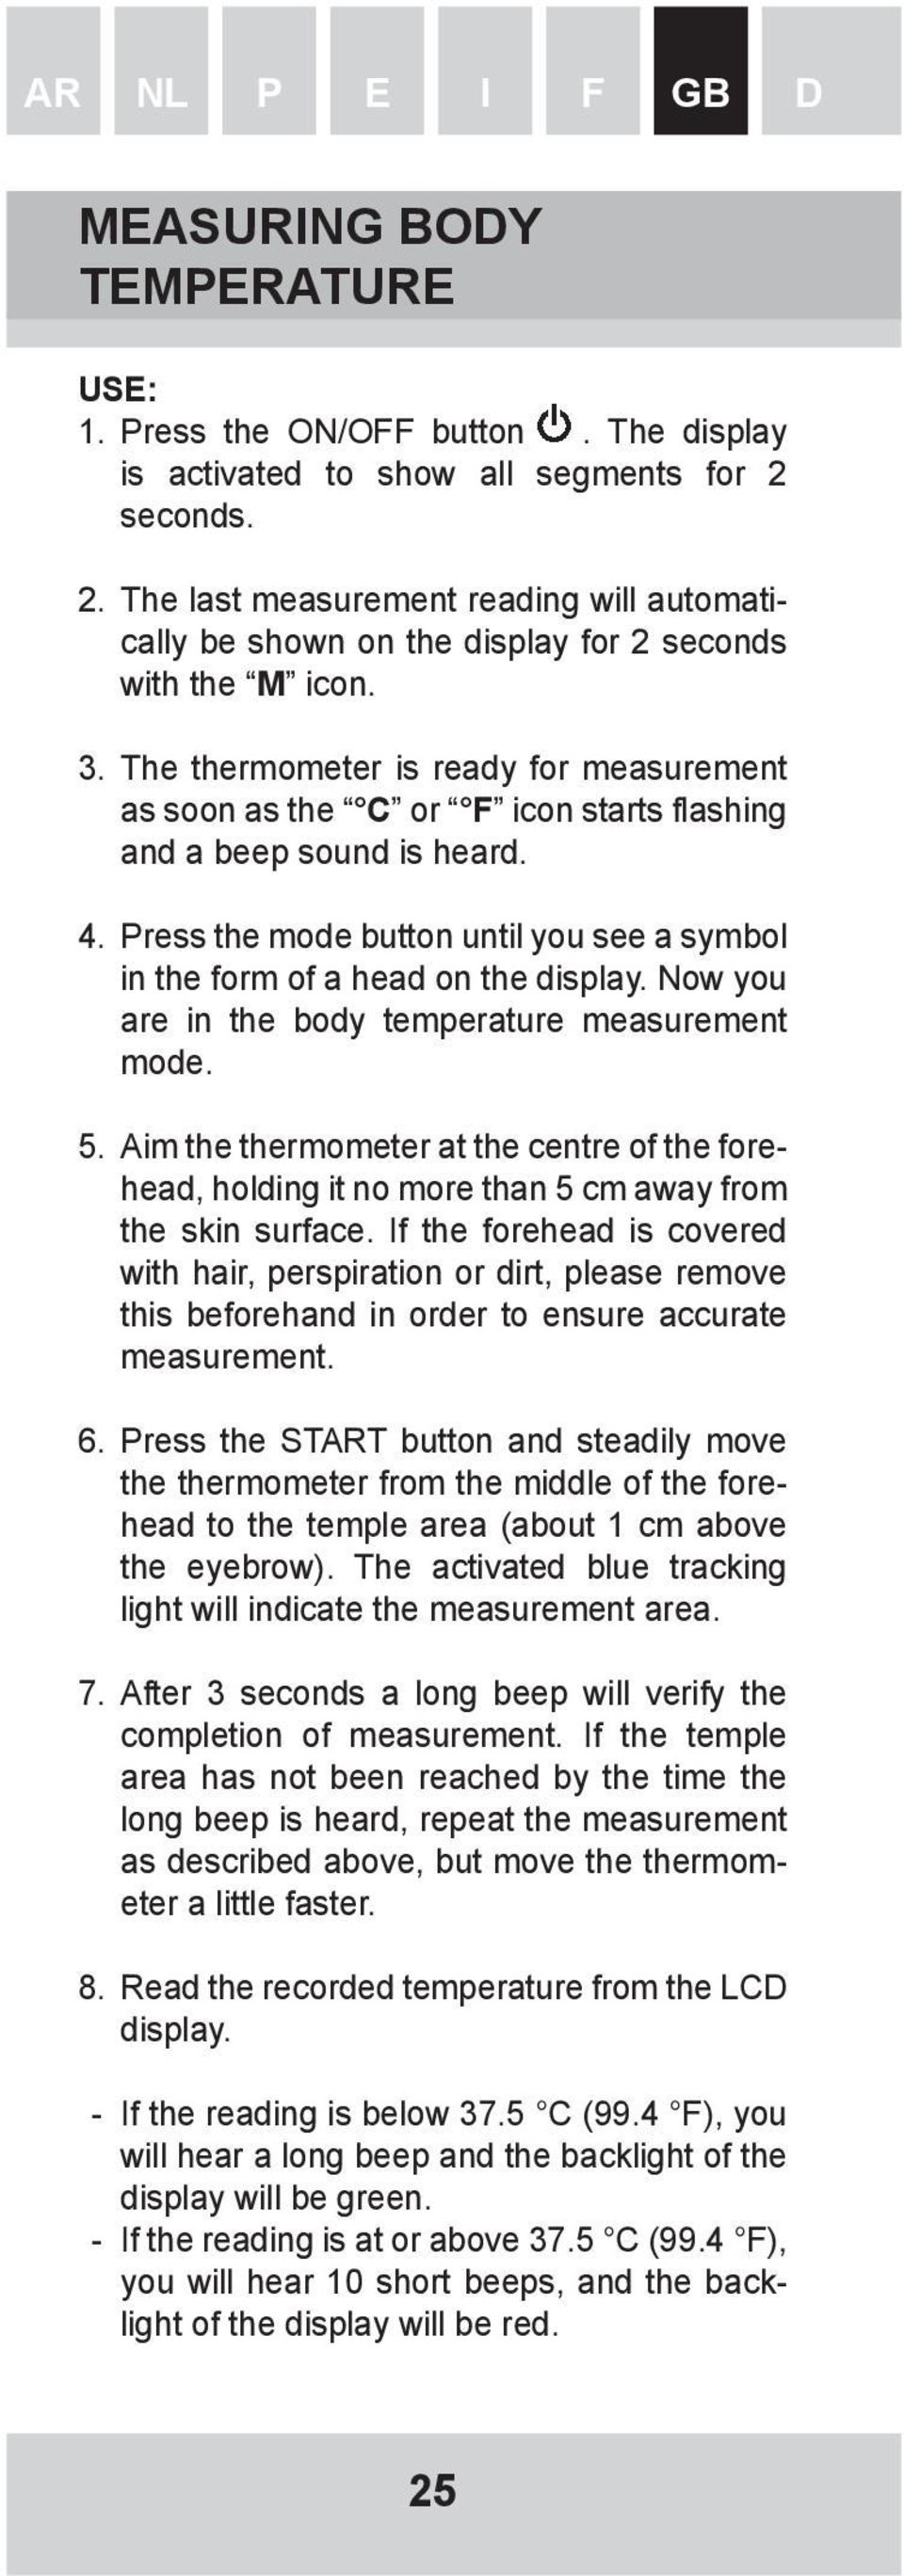 The thermometer is ready for measurement as soon as the C or F icon starts flashing and a beep sound is heard. 4. Press the mode button until you see a symbol in the form of a head on the display.